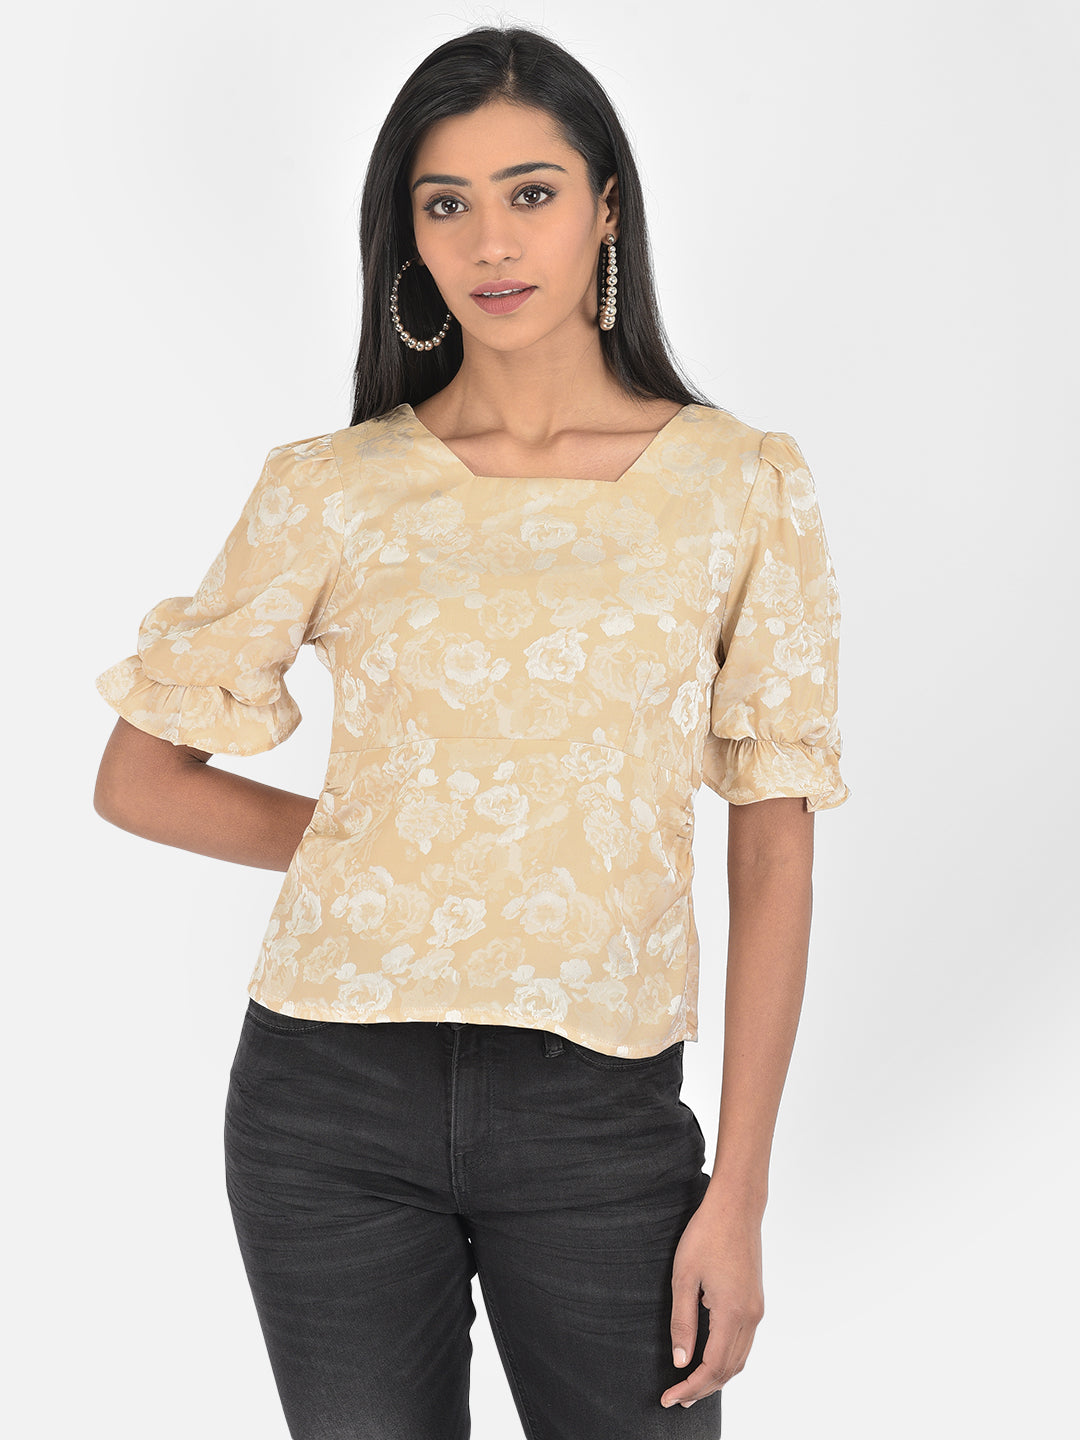 Green HalfSleeve Top with Square Neck